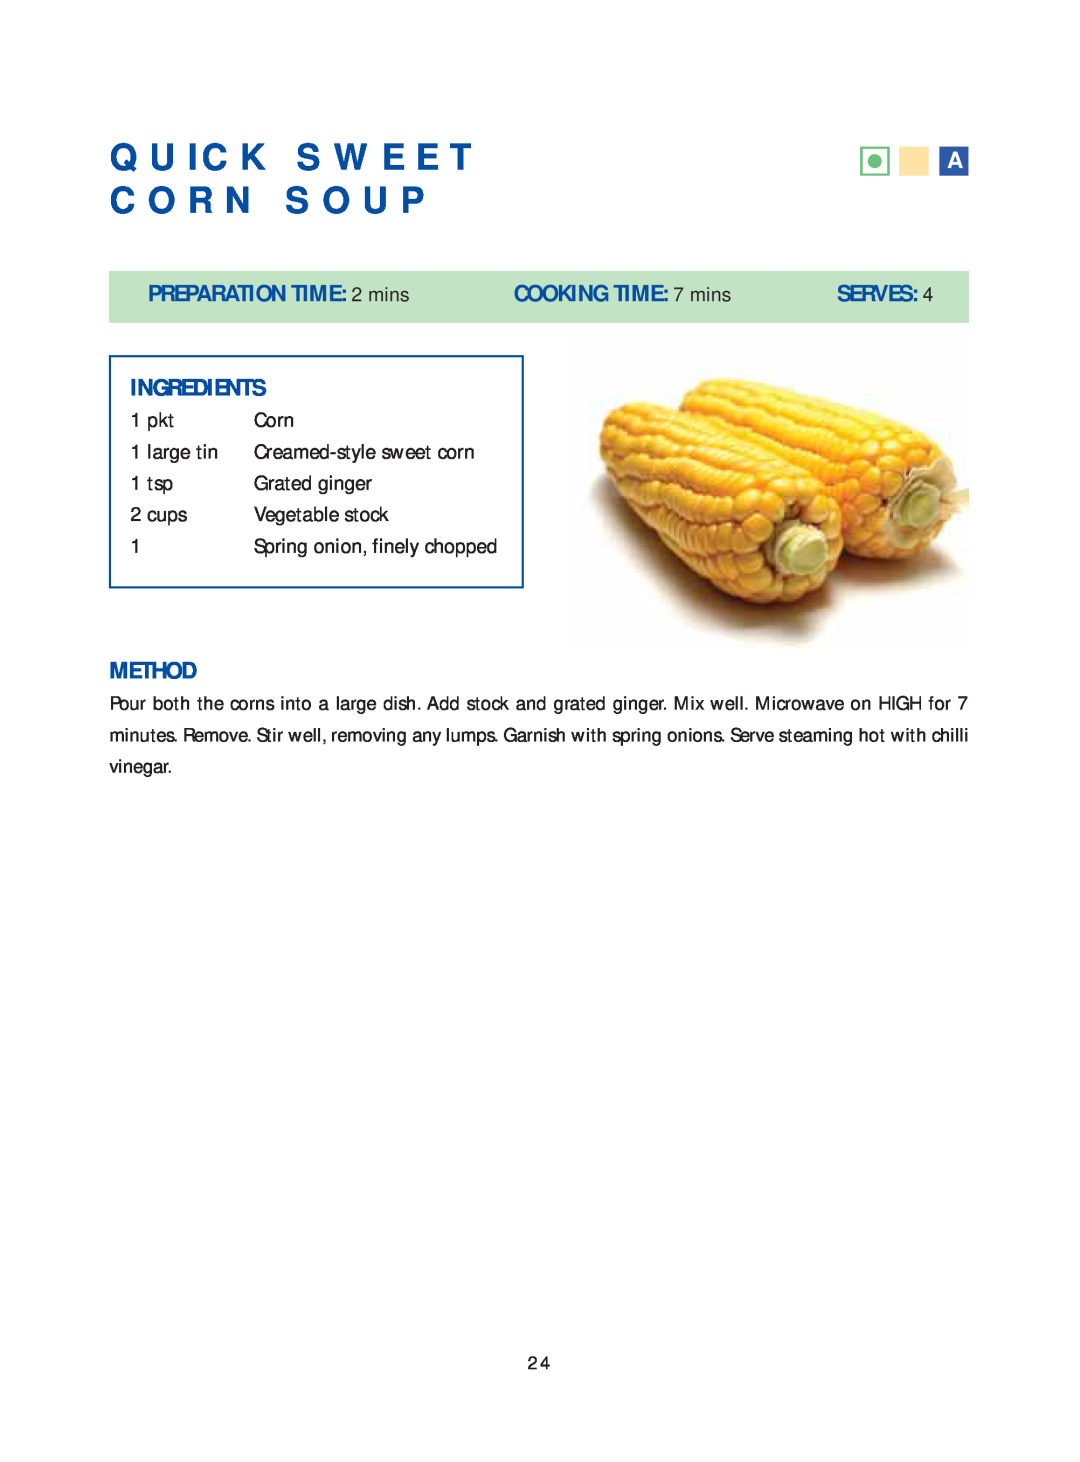 Samsung Microwave Oven Quick Sweet Corn Soup, PREPARATION TIME: 2 mins, COOKING TIME: 7 mins, Serves, Ingredients, Method 